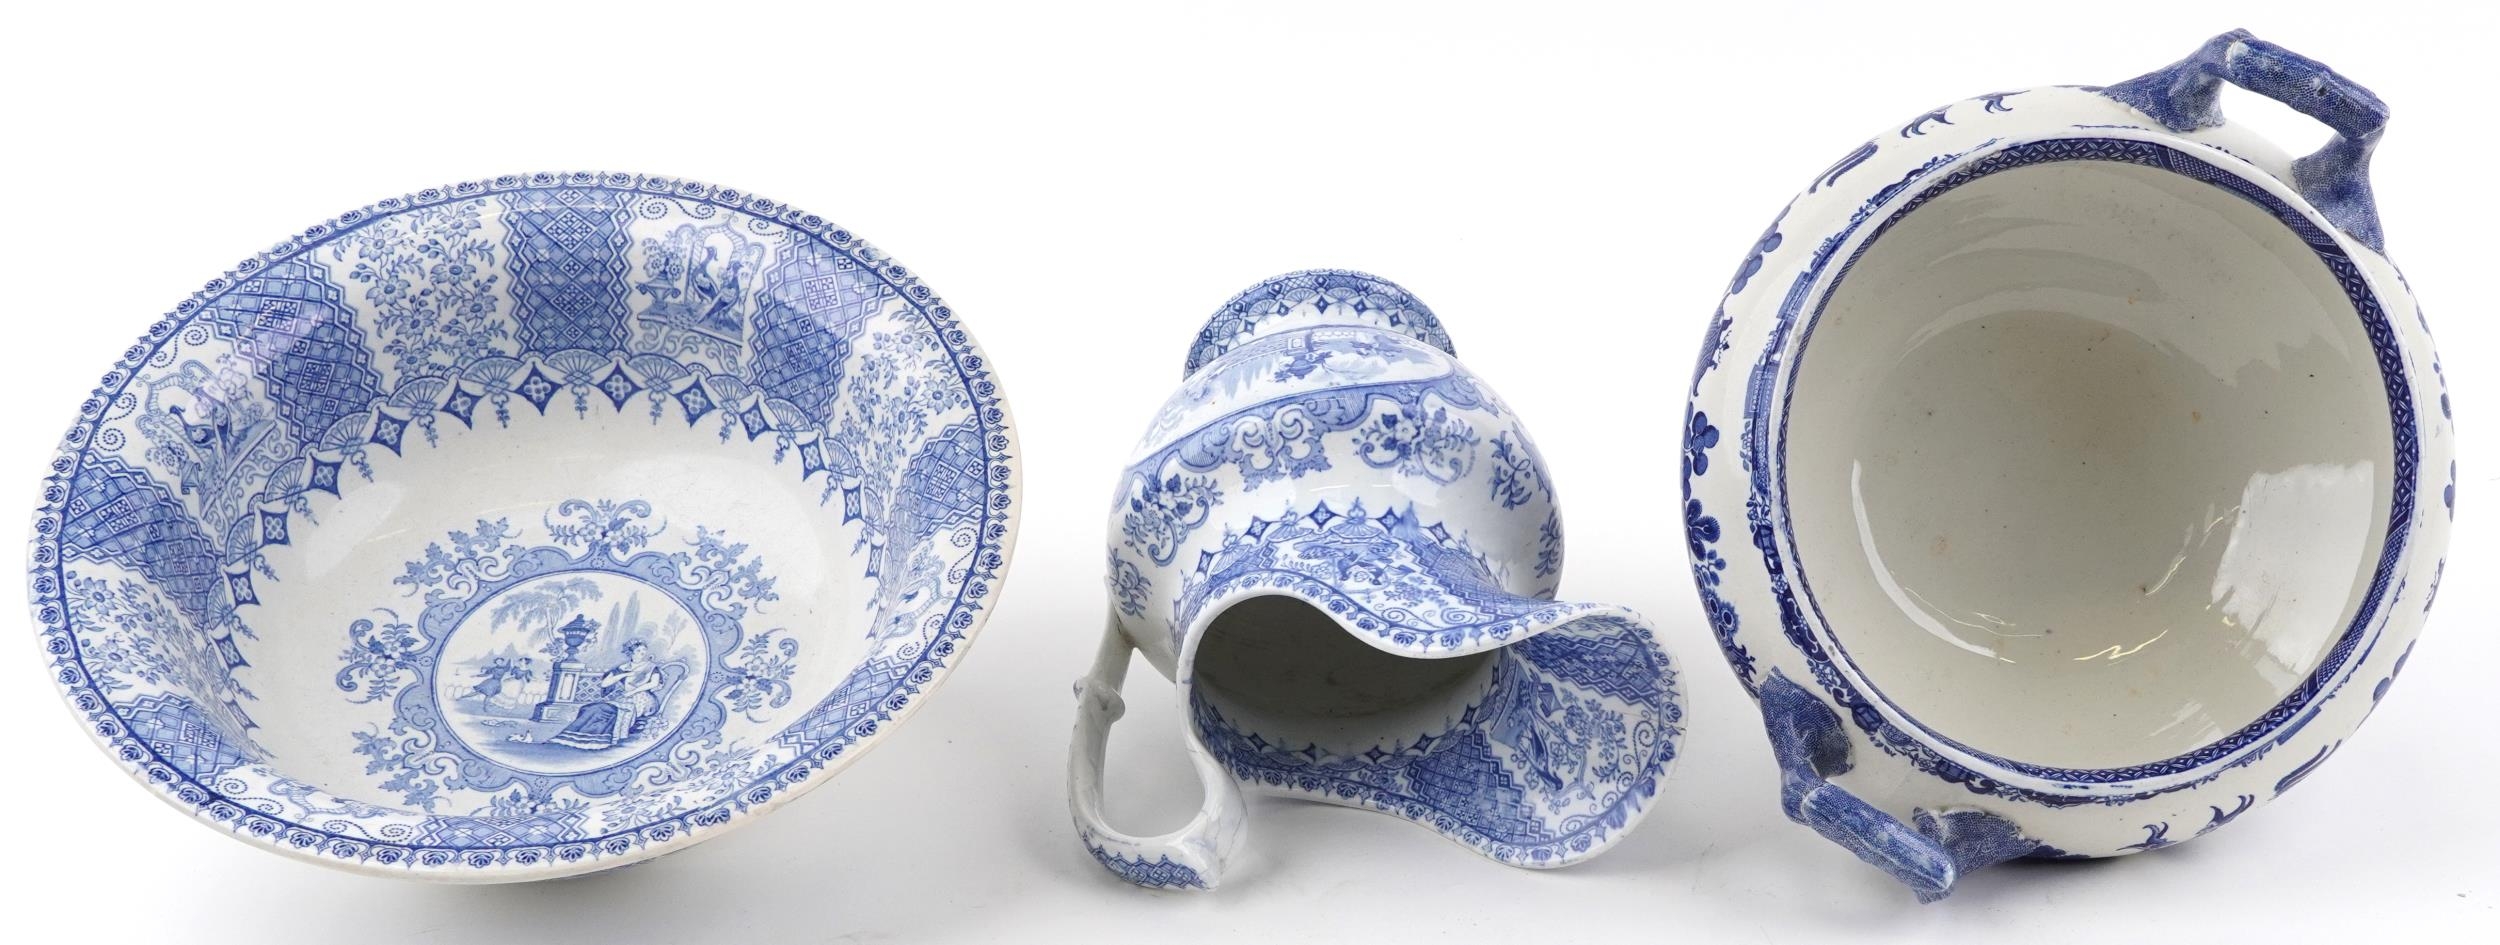 Victorian blue and white wash jug and basin, transfer printed in the Tyrolienne pattern and a - Image 8 of 10